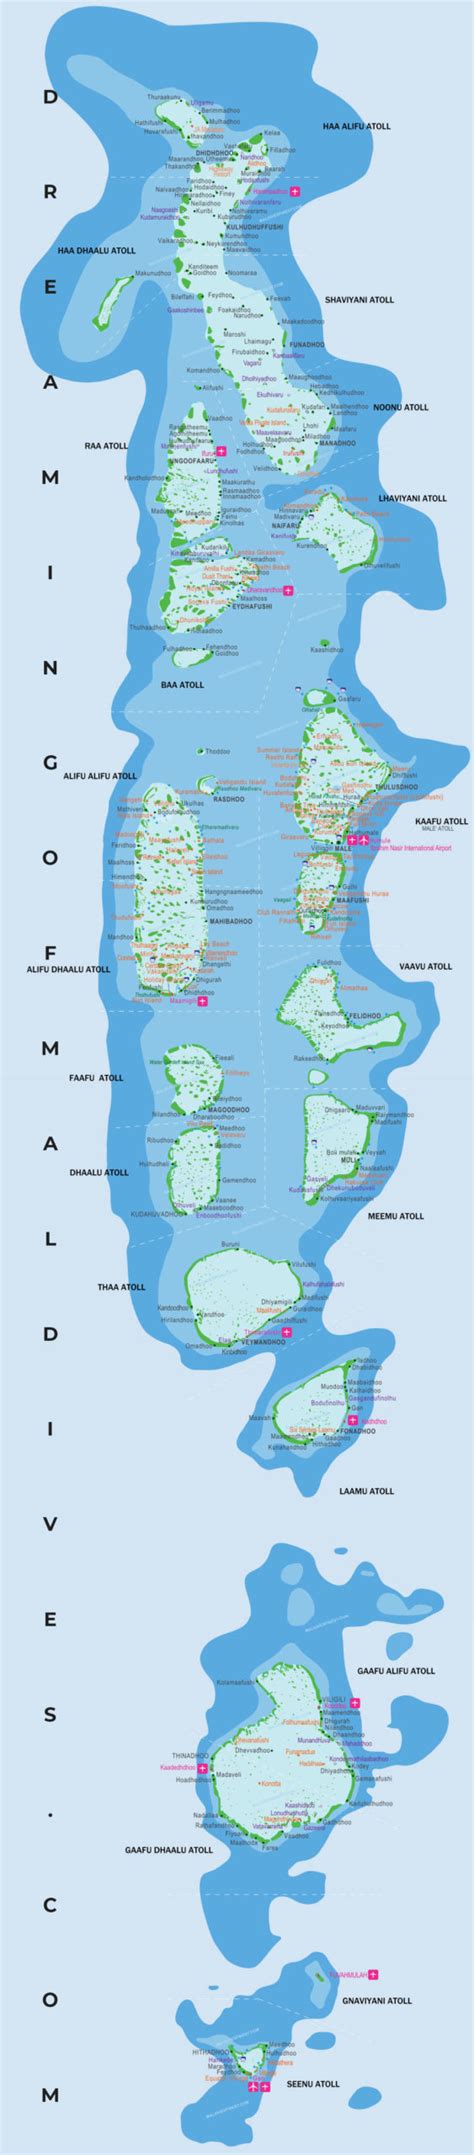 Maldives Islands Map 2020 Locate Your Favorite Resort On The Map